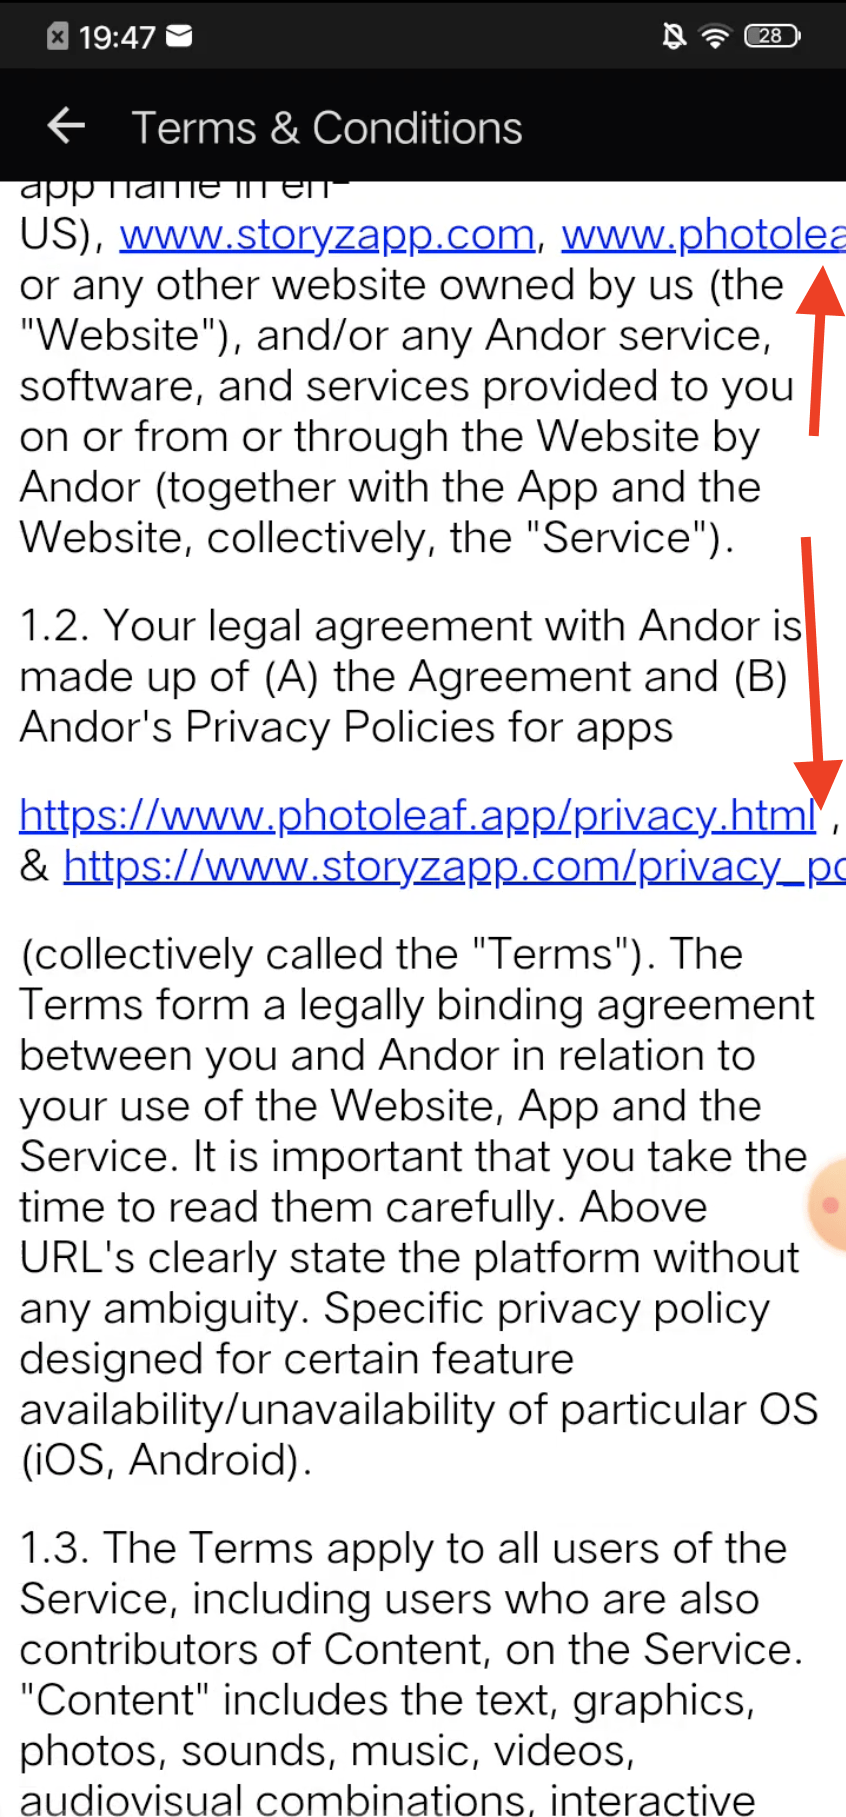 Some Terms and Conditions links do not fit the screen